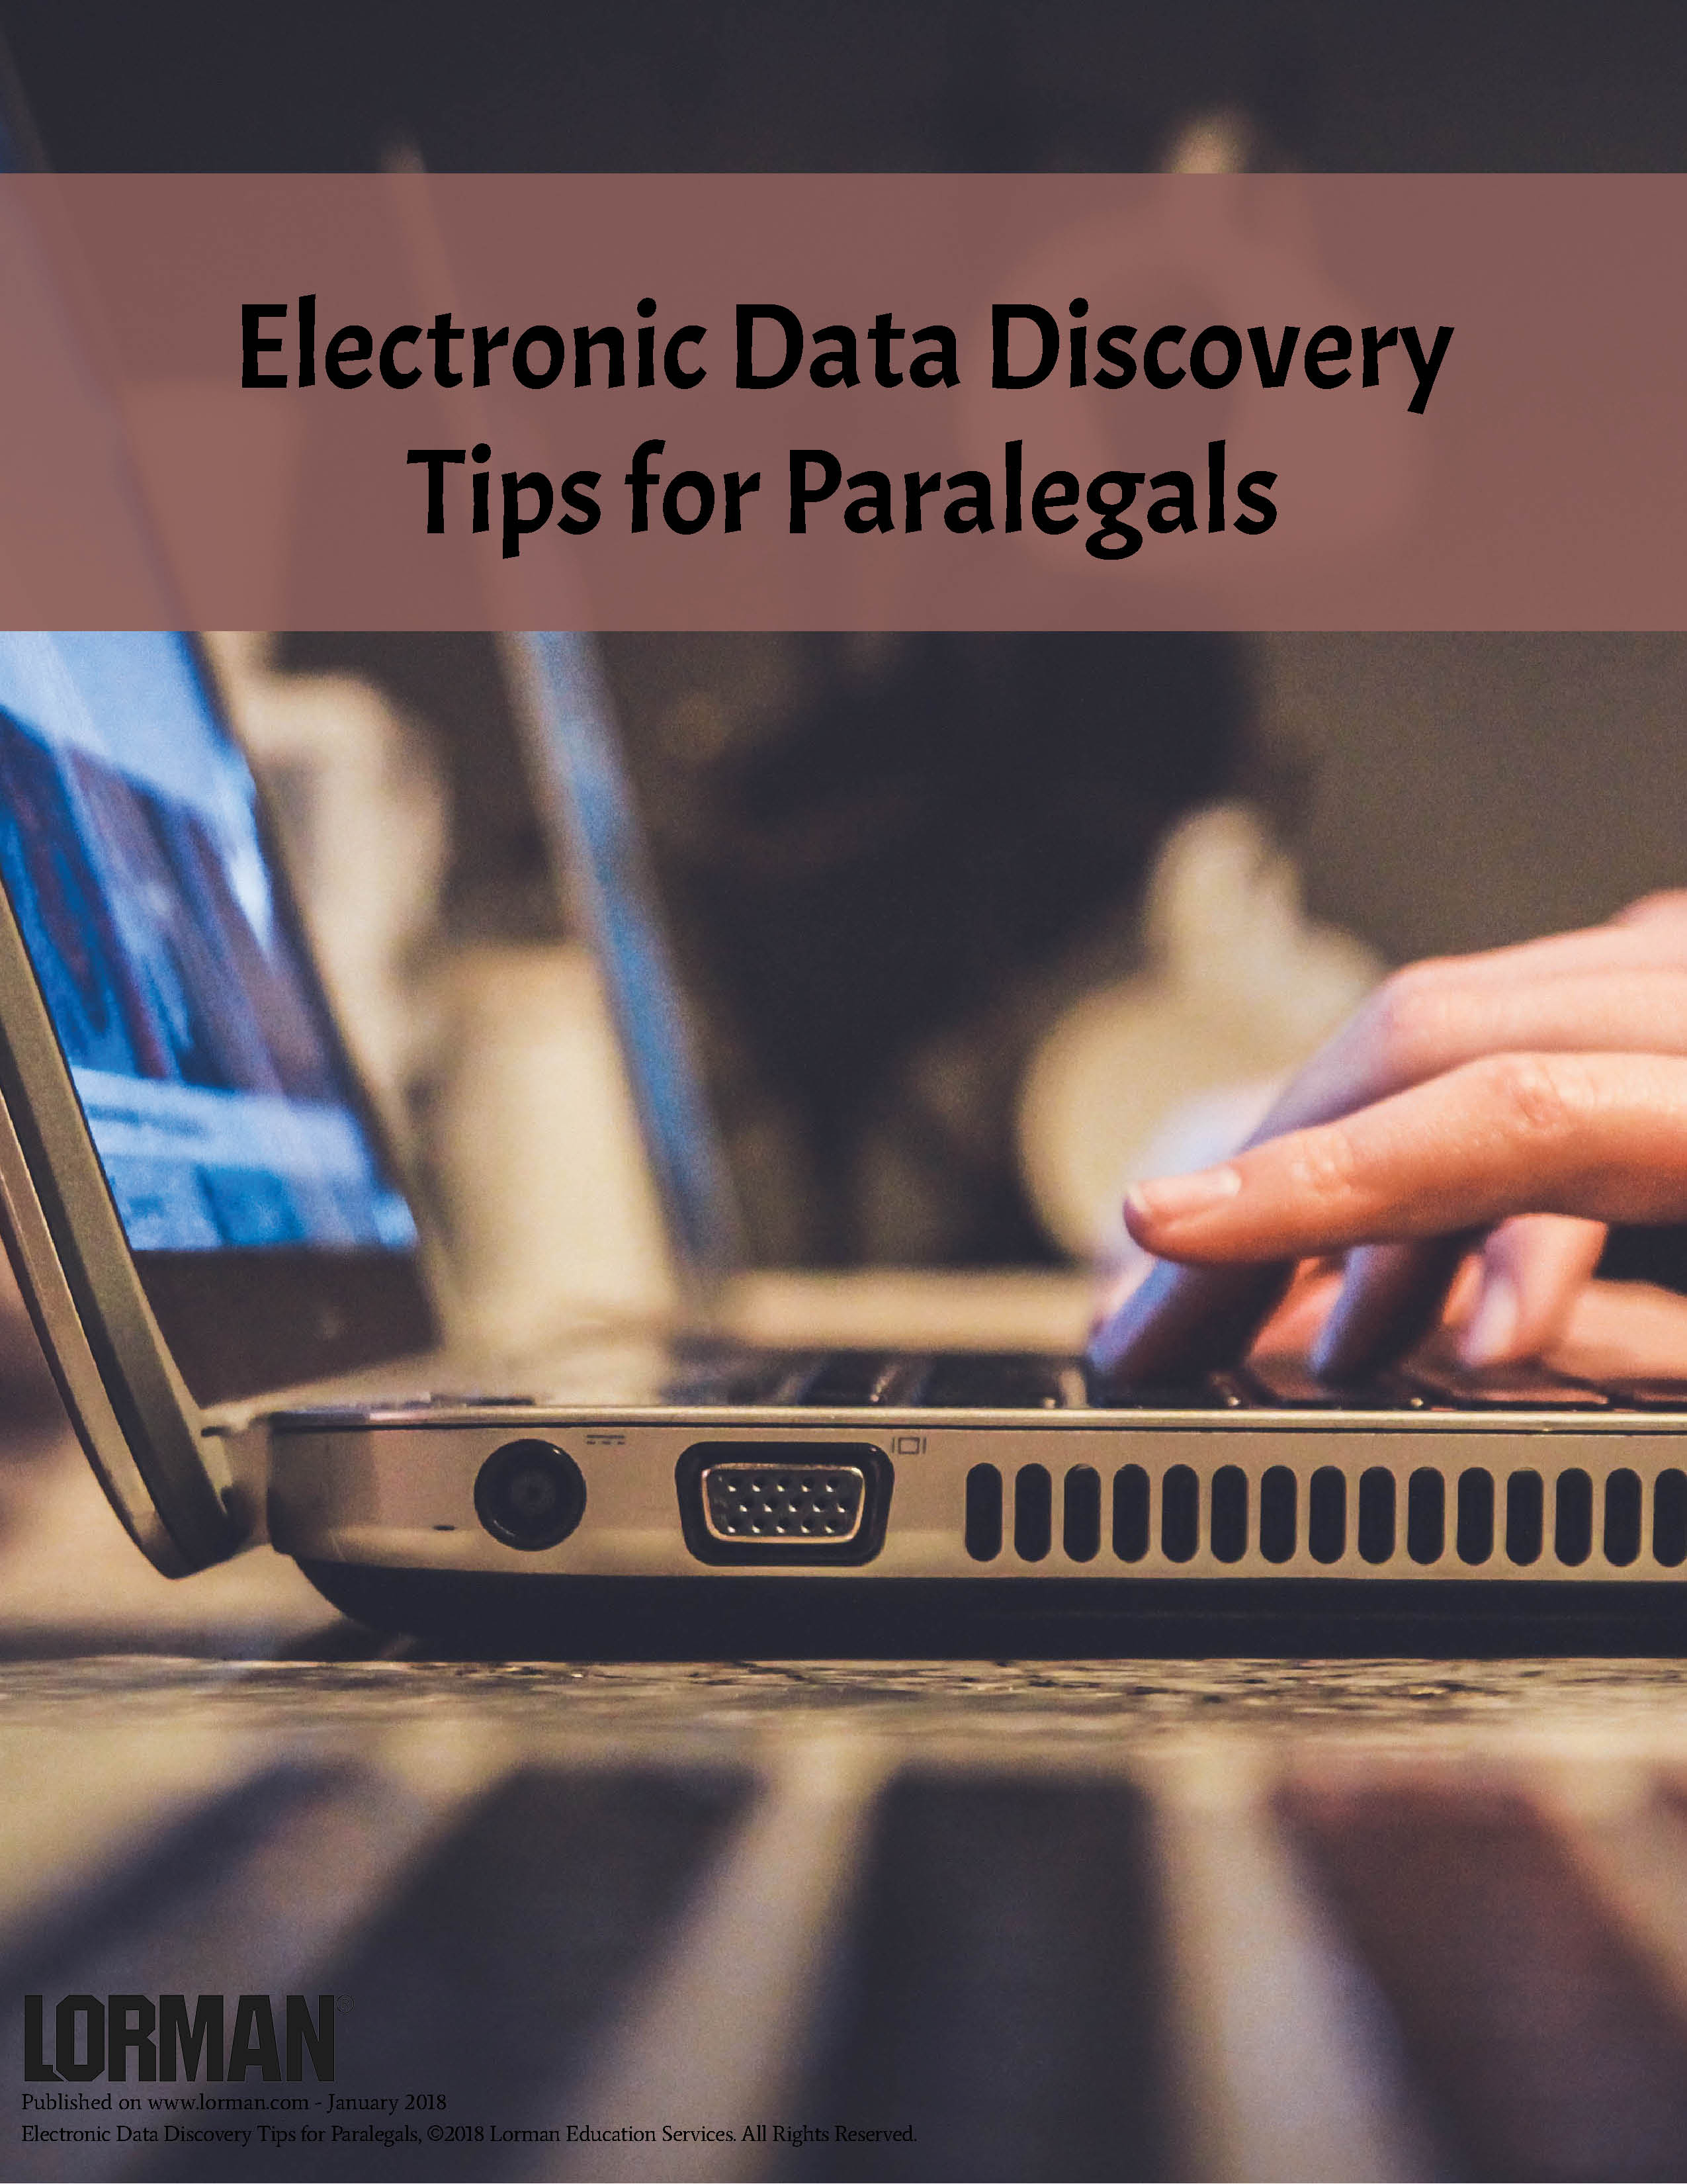 Electronic Data Discovery Tips for Paralegals